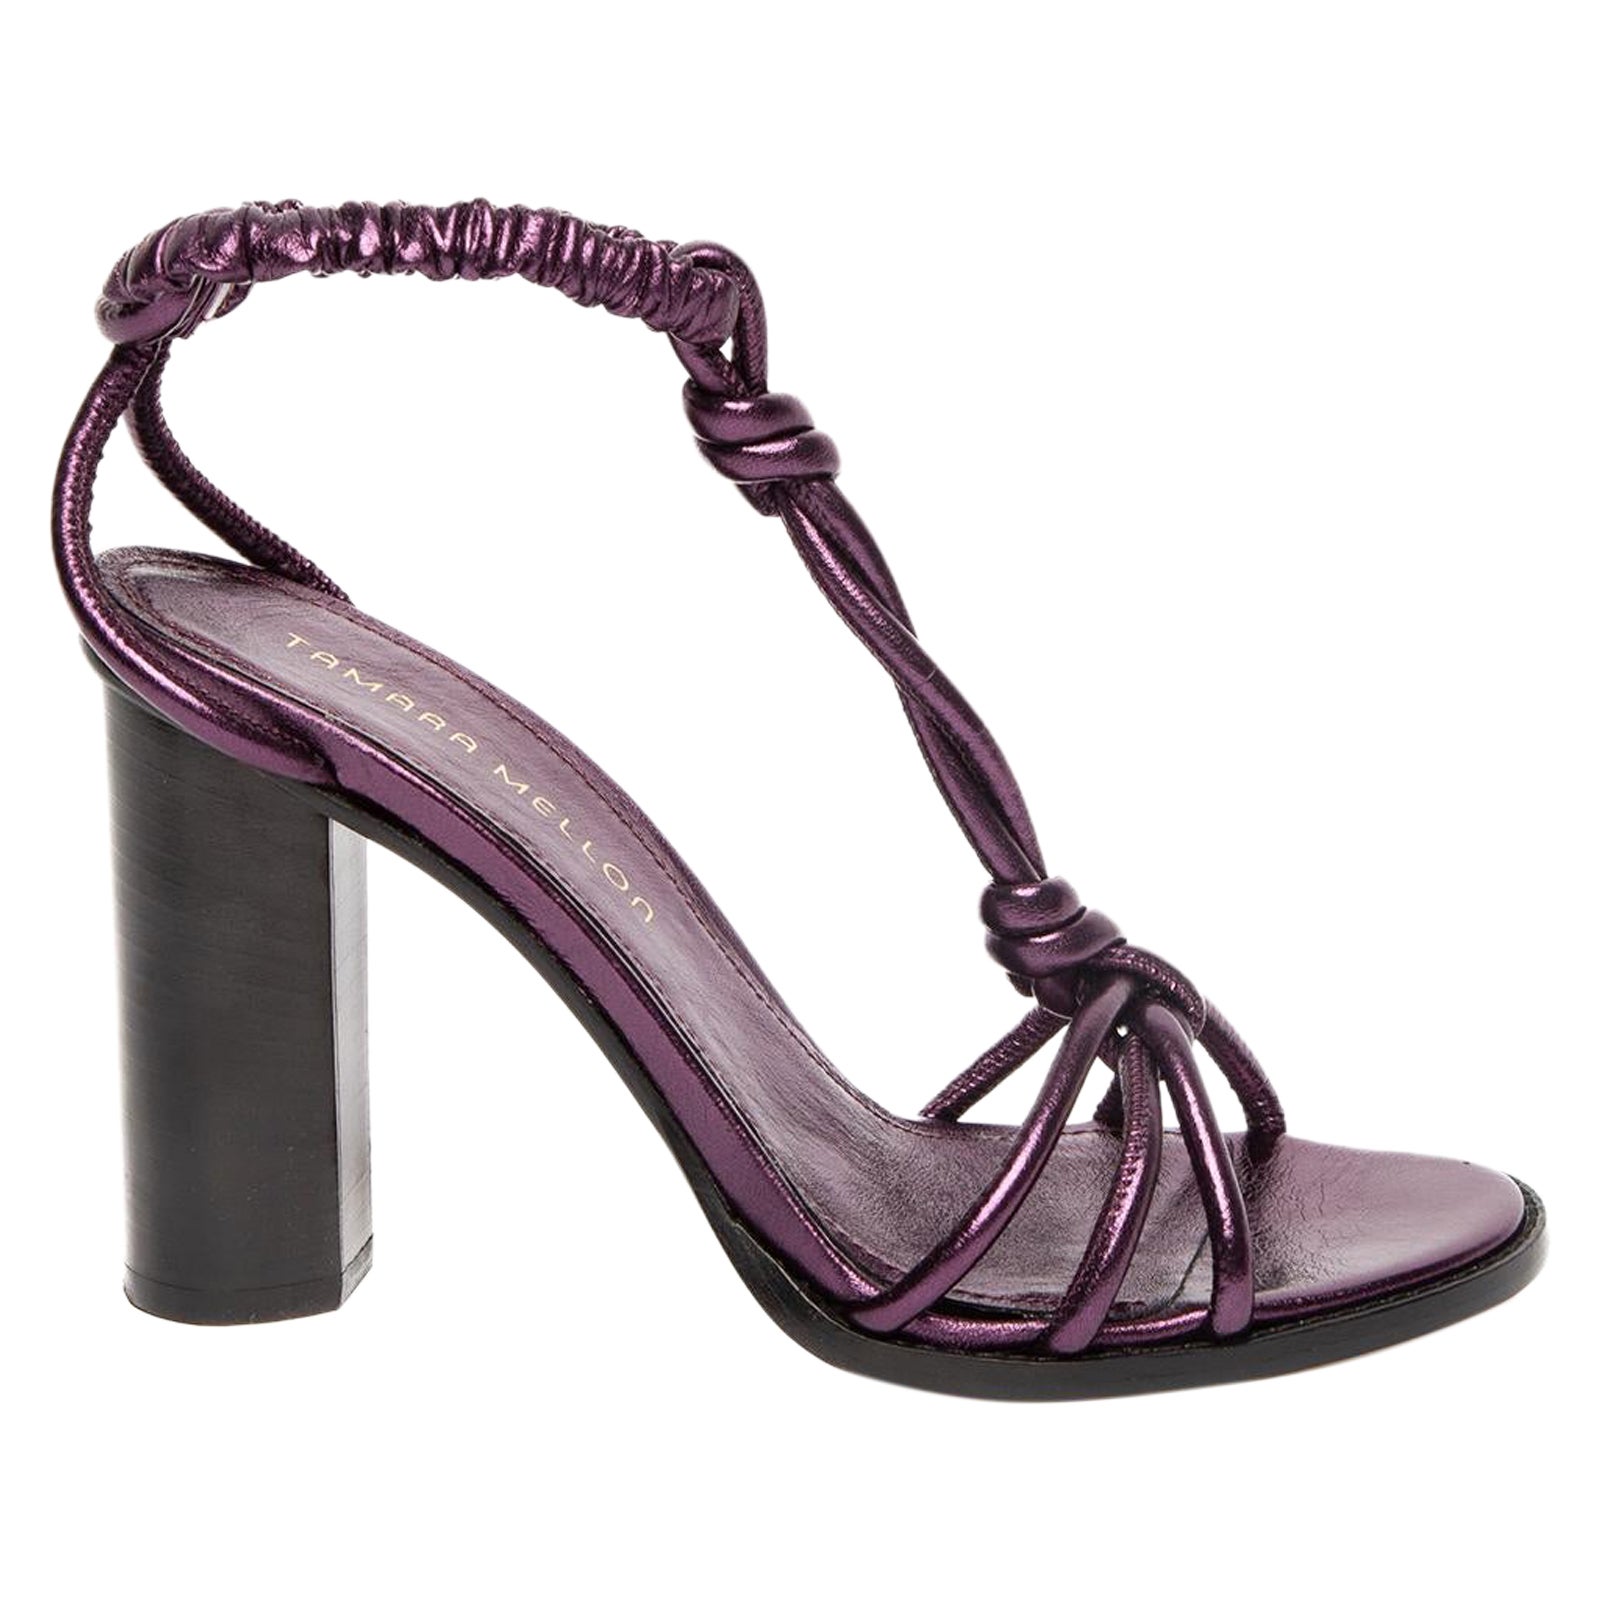 Tamara Mellon Knot Leather Heeled Sandals in Aubergine Size UK 3 For Sale